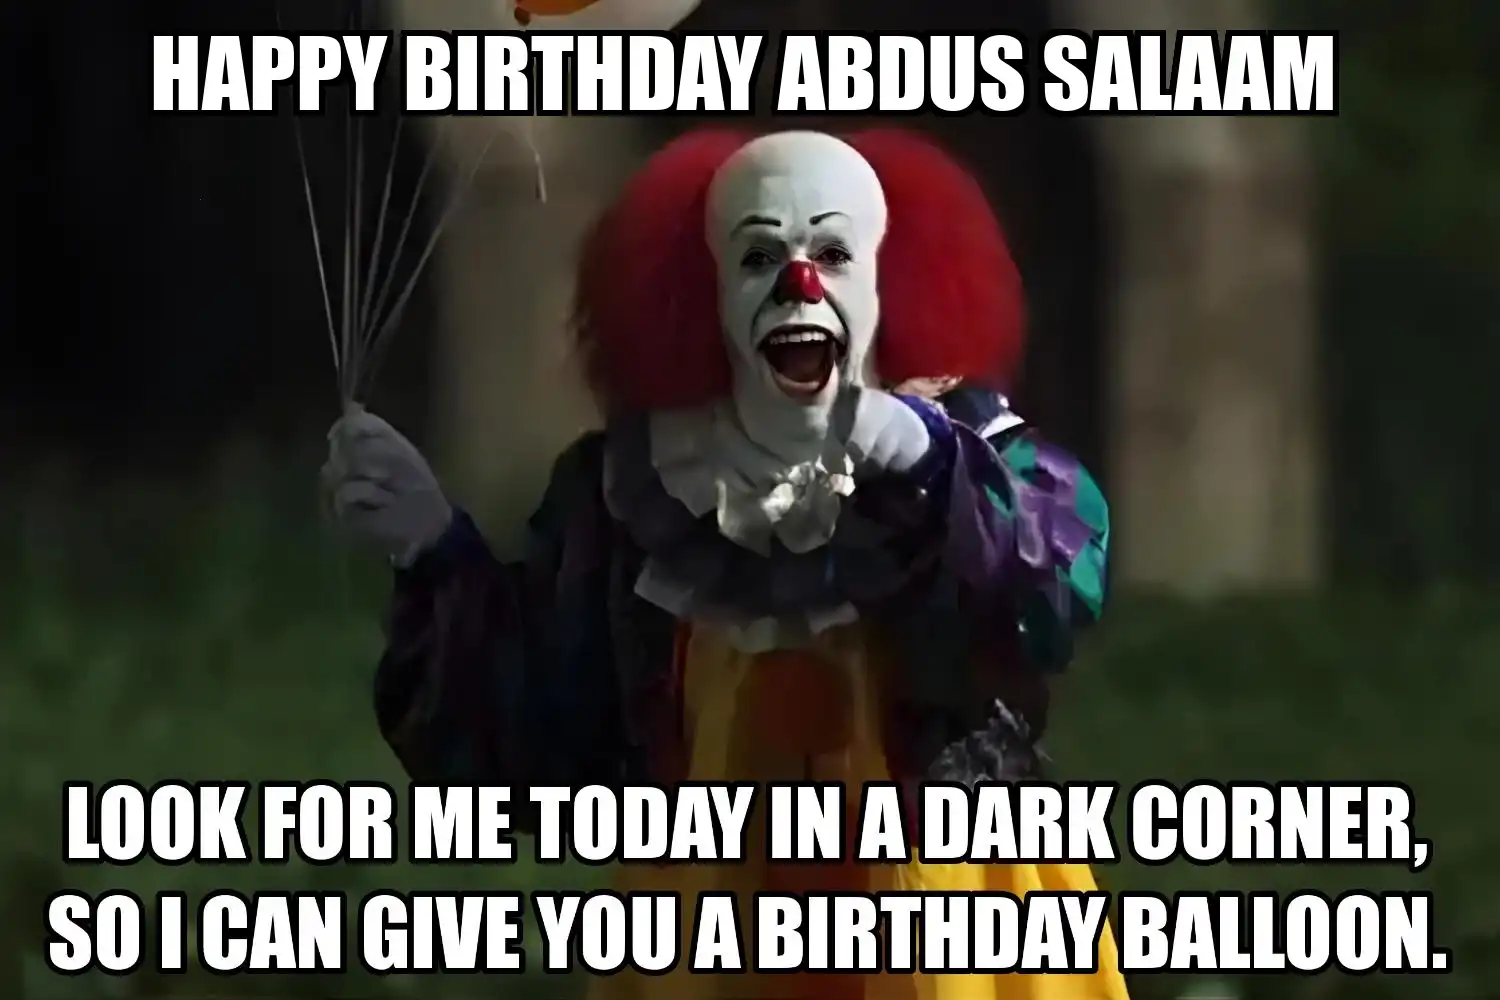 Happy Birthday Abdus Salaam I Can Give You A Balloon Meme